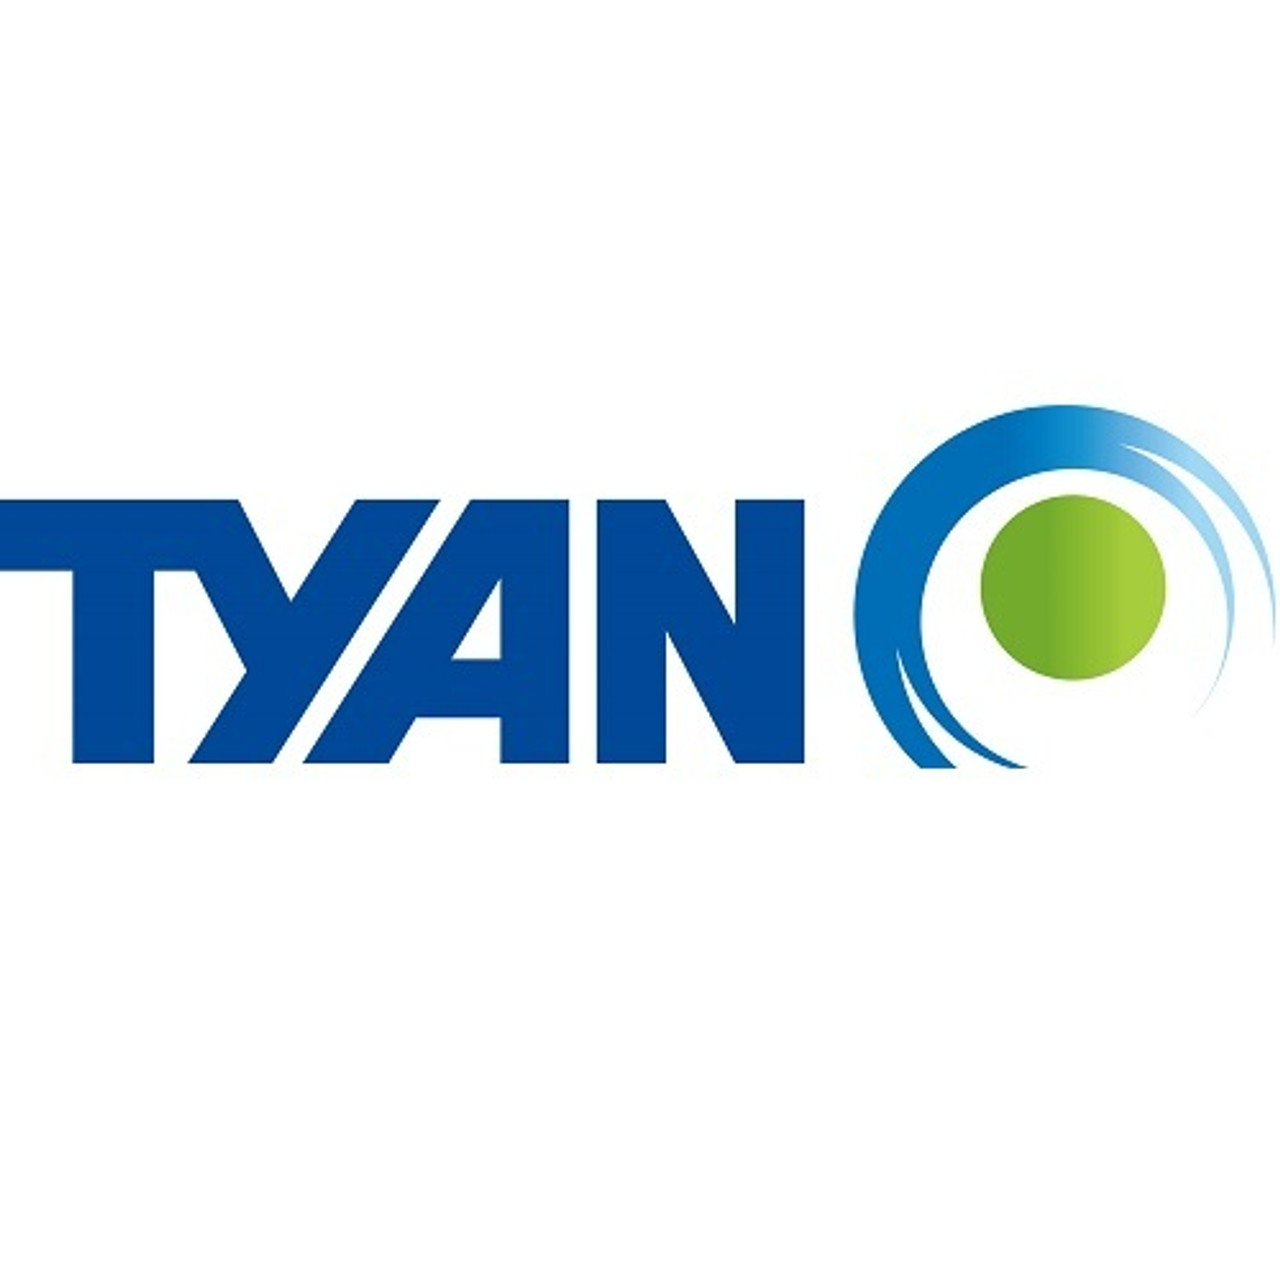 Tyan Intel Xeon SP based 10 GPU server with support for up to 10 GPU cards and a x16 networking card. Ideal for Artificial Intelligence, Machine Learning, and Deep Neural Network workloads.